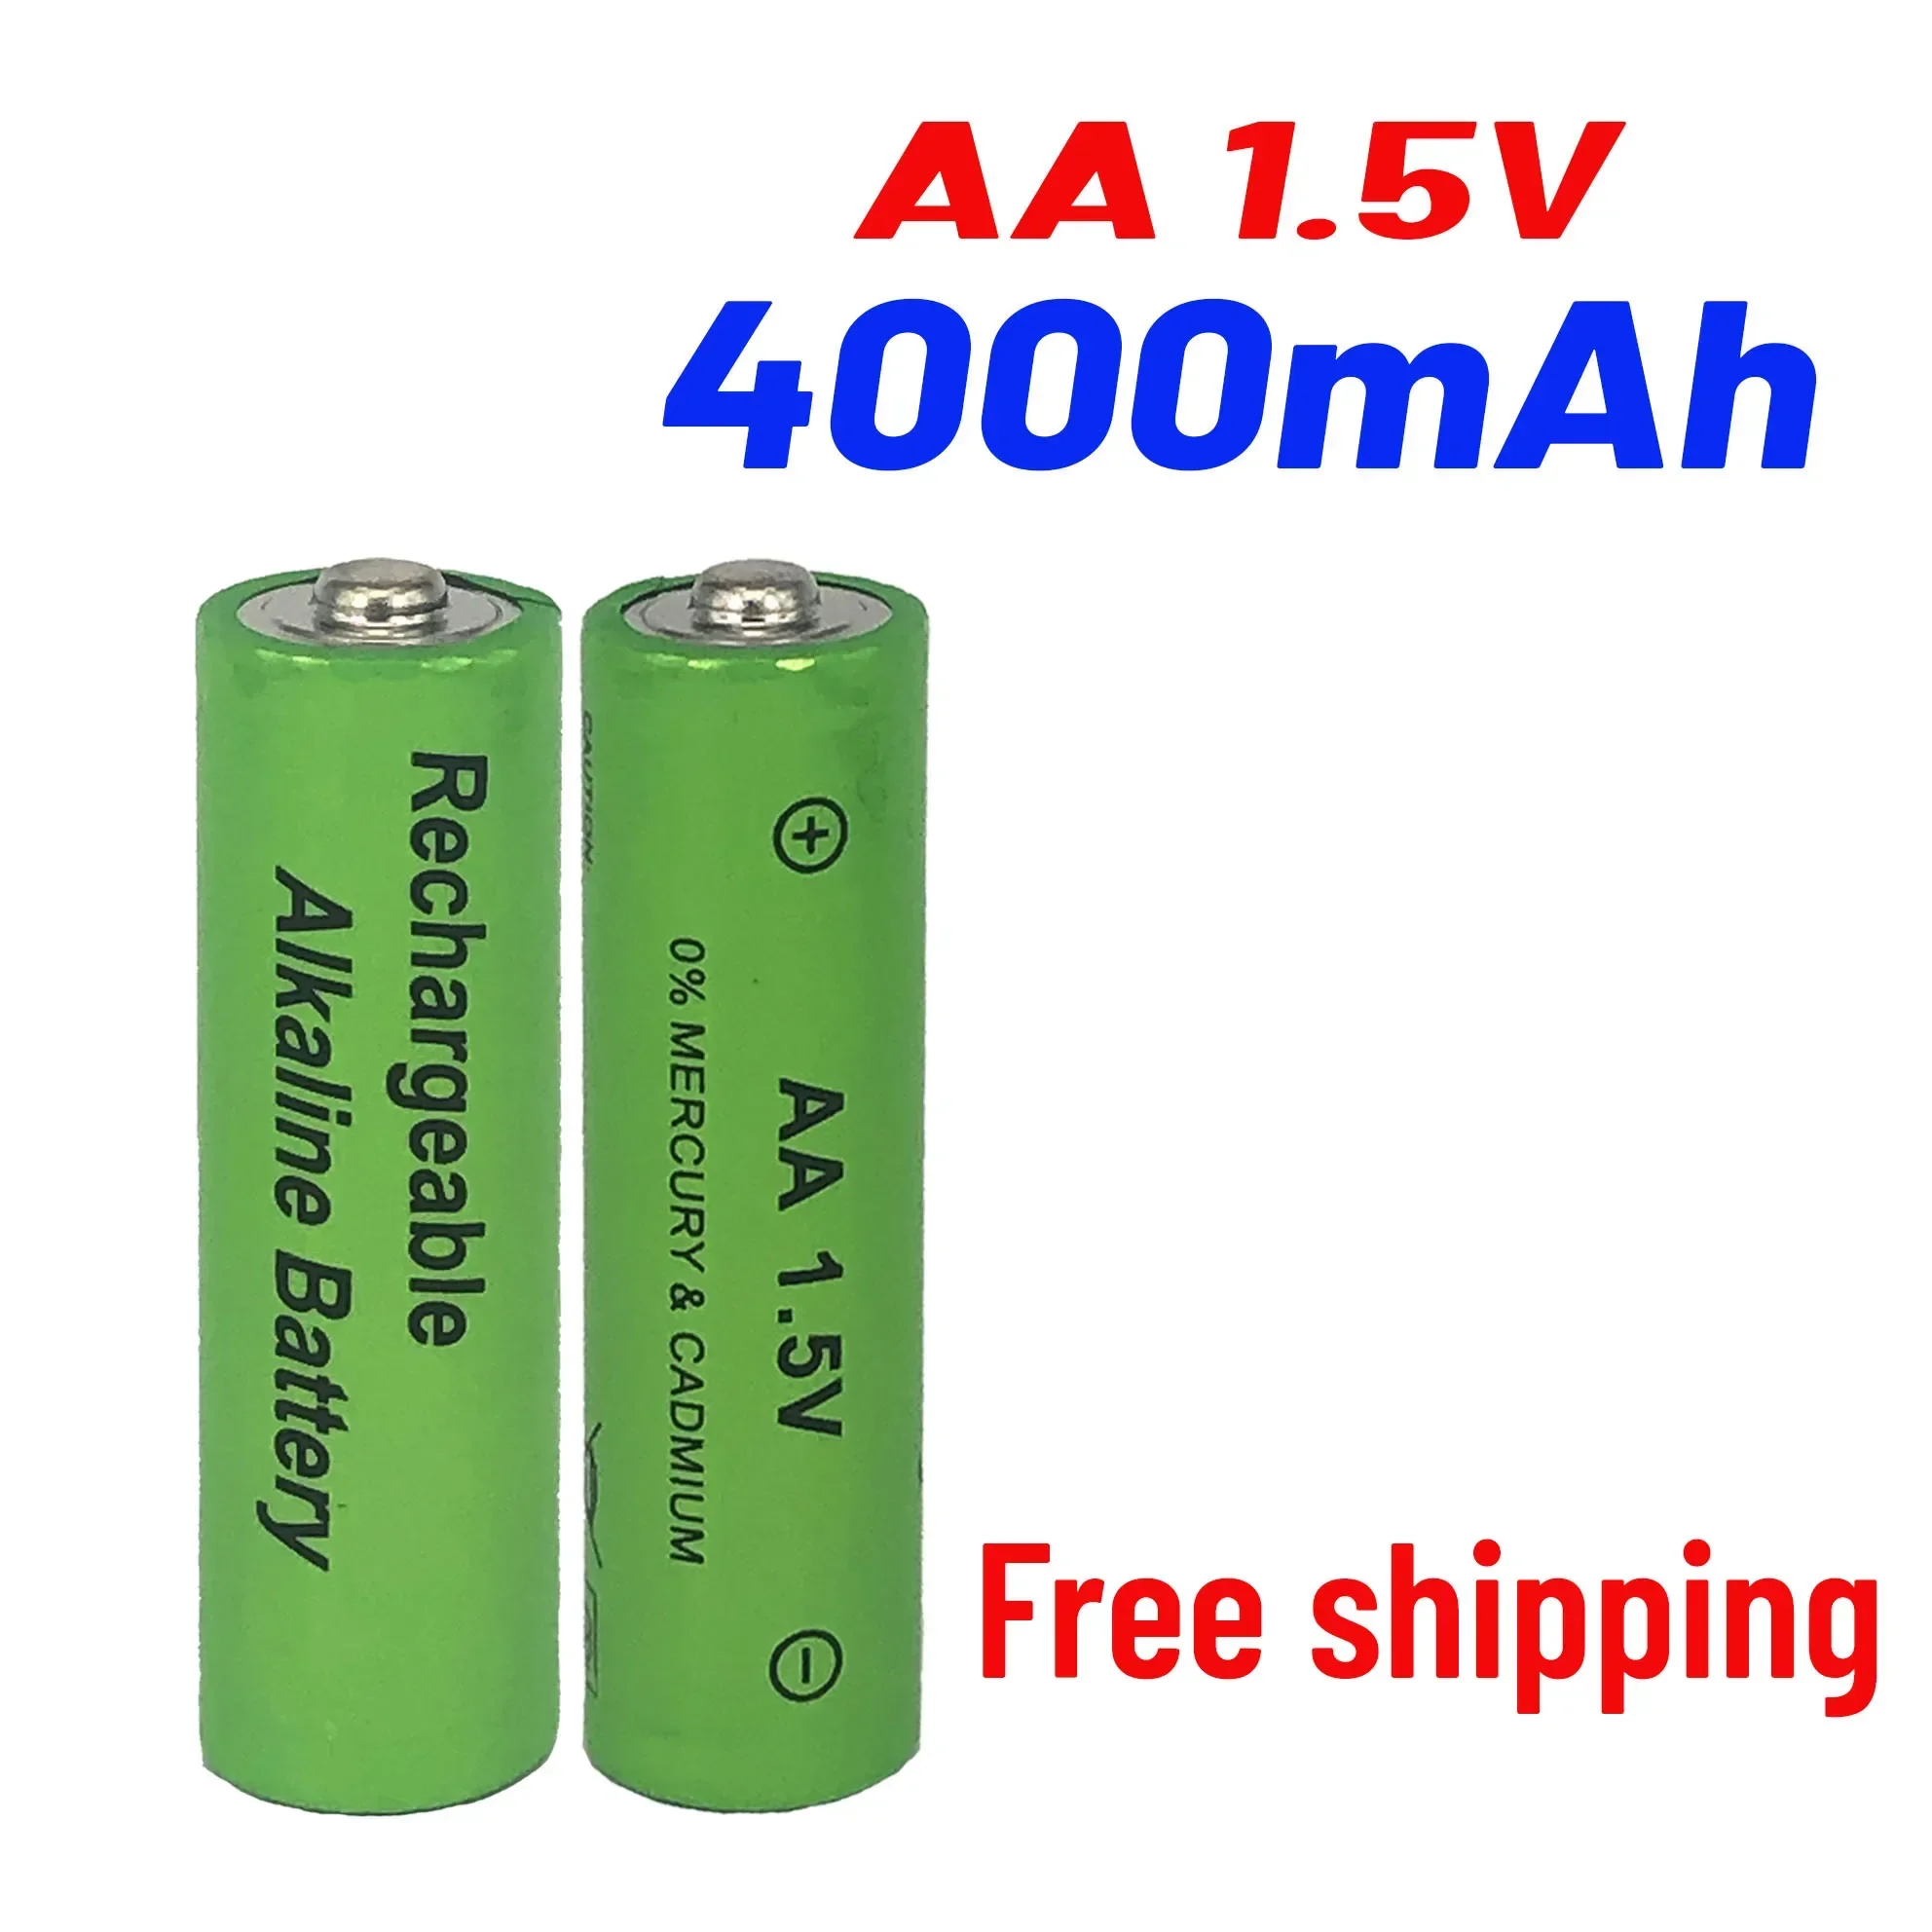 

Brand AA rechargeable battery 4000mah 1.5V New Alkaline Rechargeable batery for led light toy mp3 + Free shipping